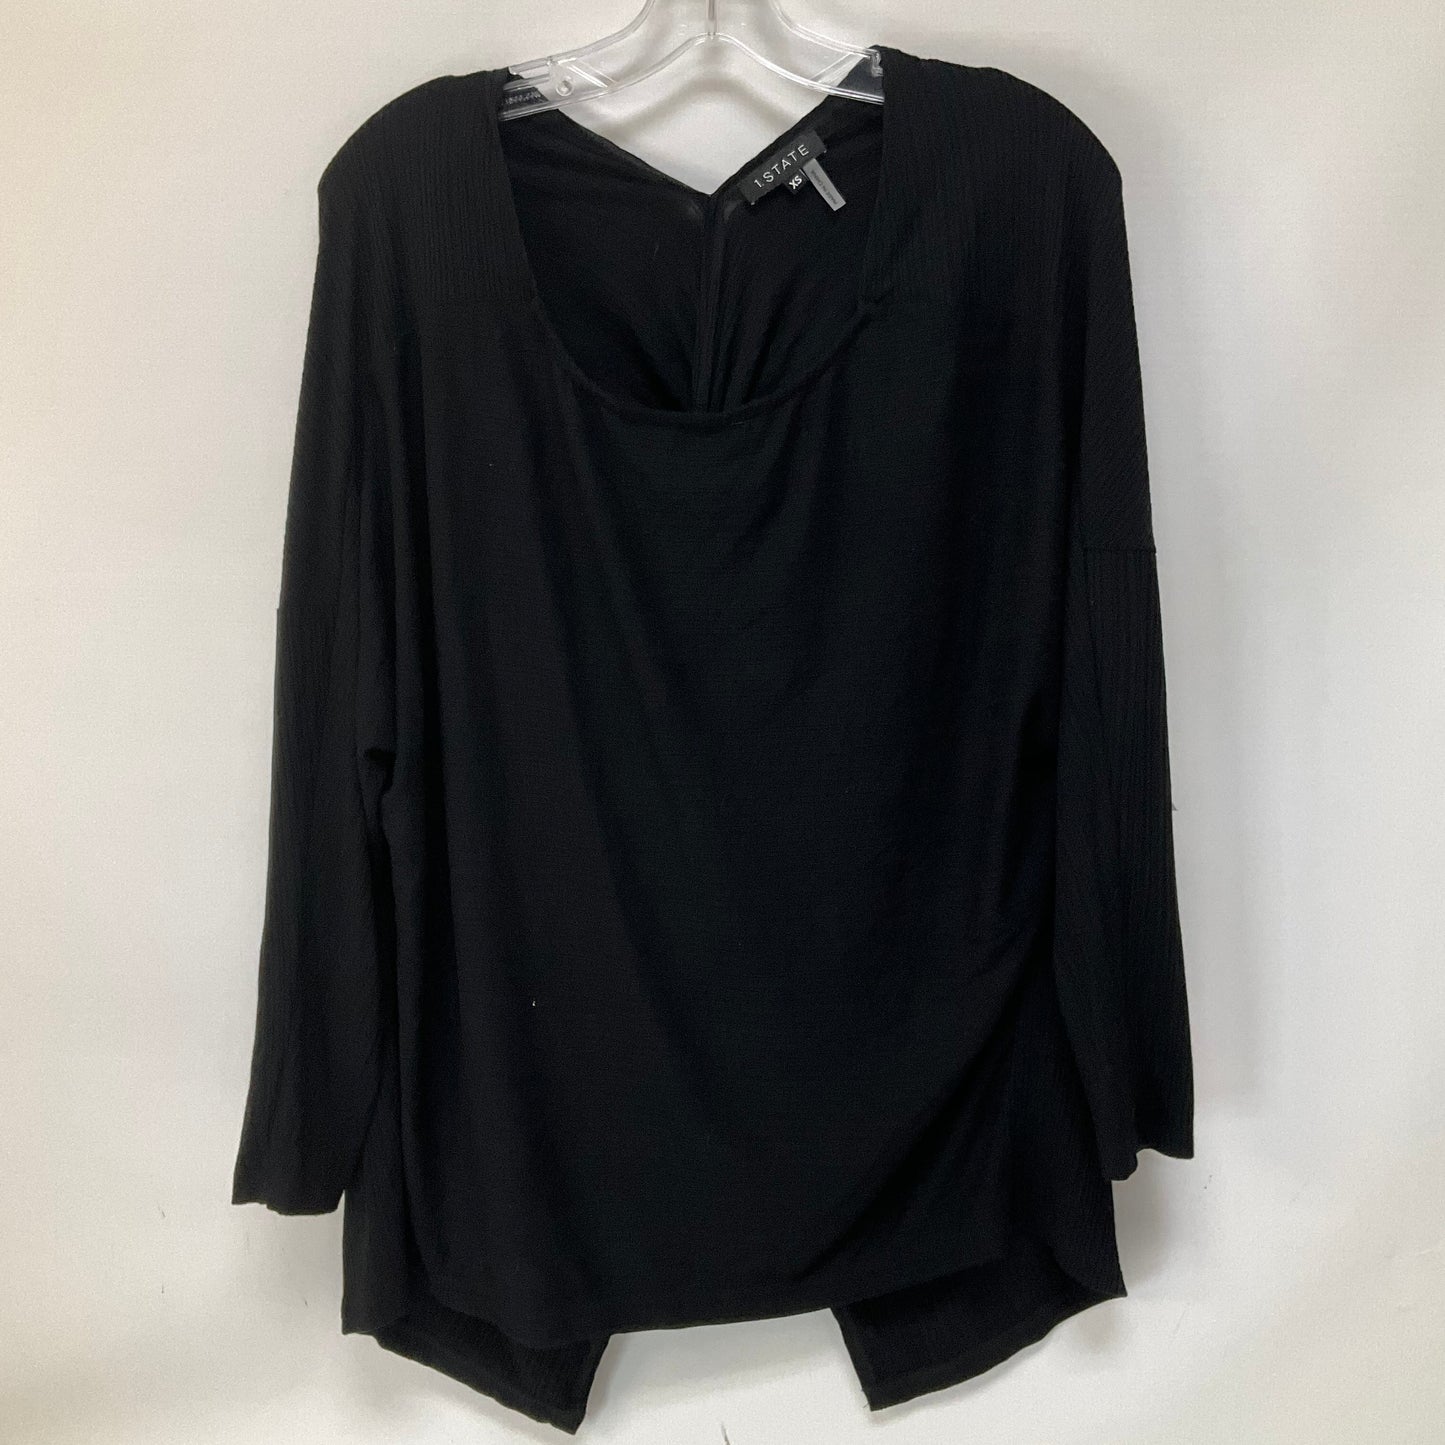 Black Top Long Sleeve 1.state, Size Xs